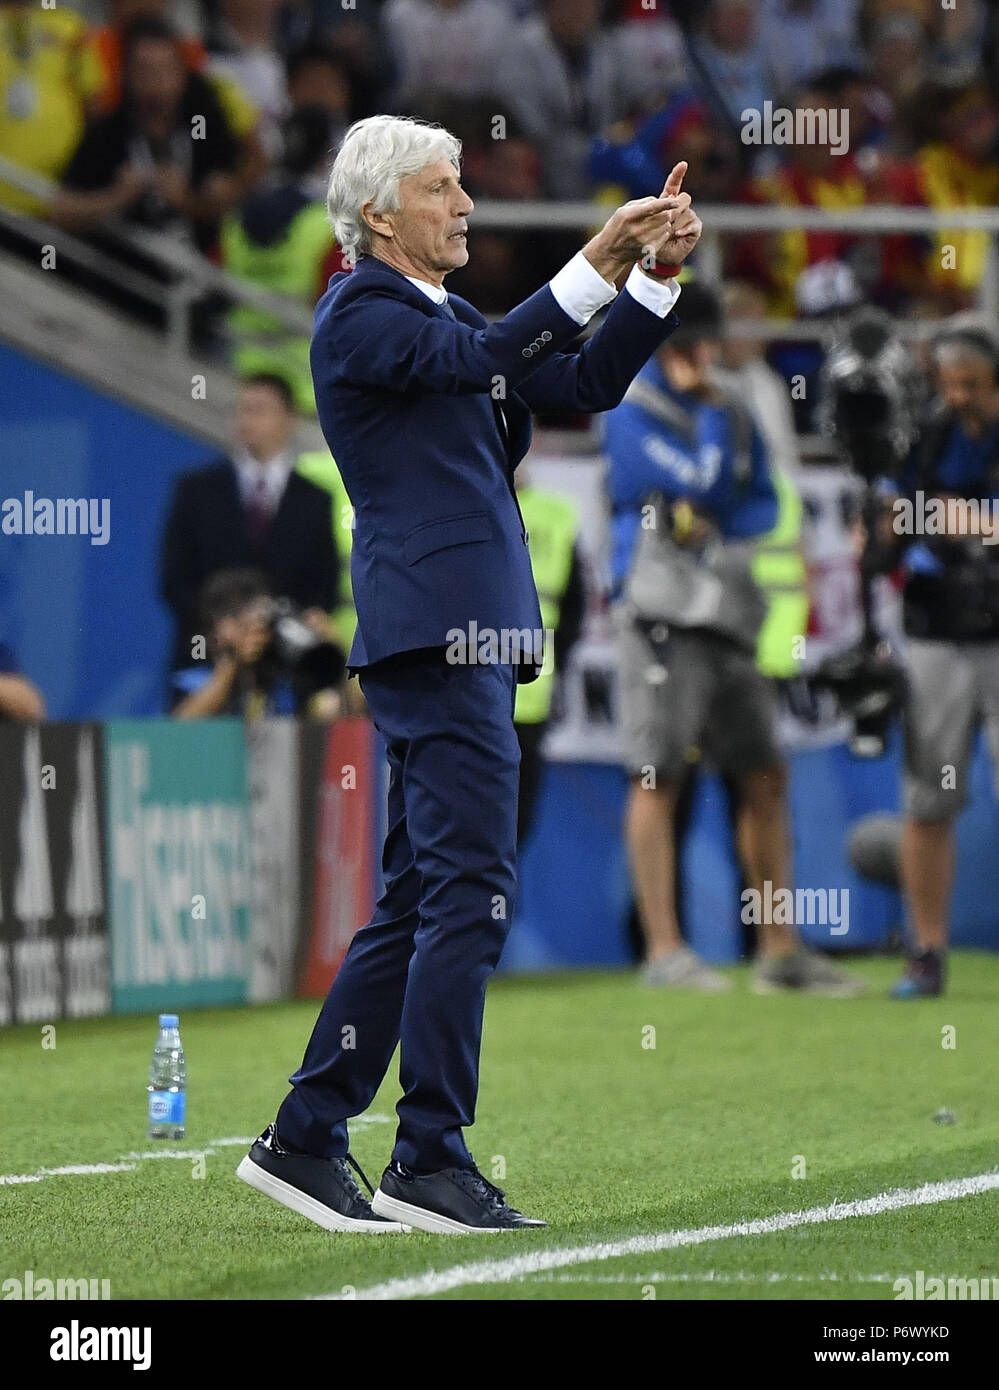 Moscow, Russia. 3rd July, 2018. Head coach Jose Pekerman of Colombia gives instructions to players during the 2018 FIFA World Cup round of 16 match between England and Colombia in Moscow, Russia, July 3, 2018. Credit: He Canling/Xinhua/Alamy Live News Stock Photo